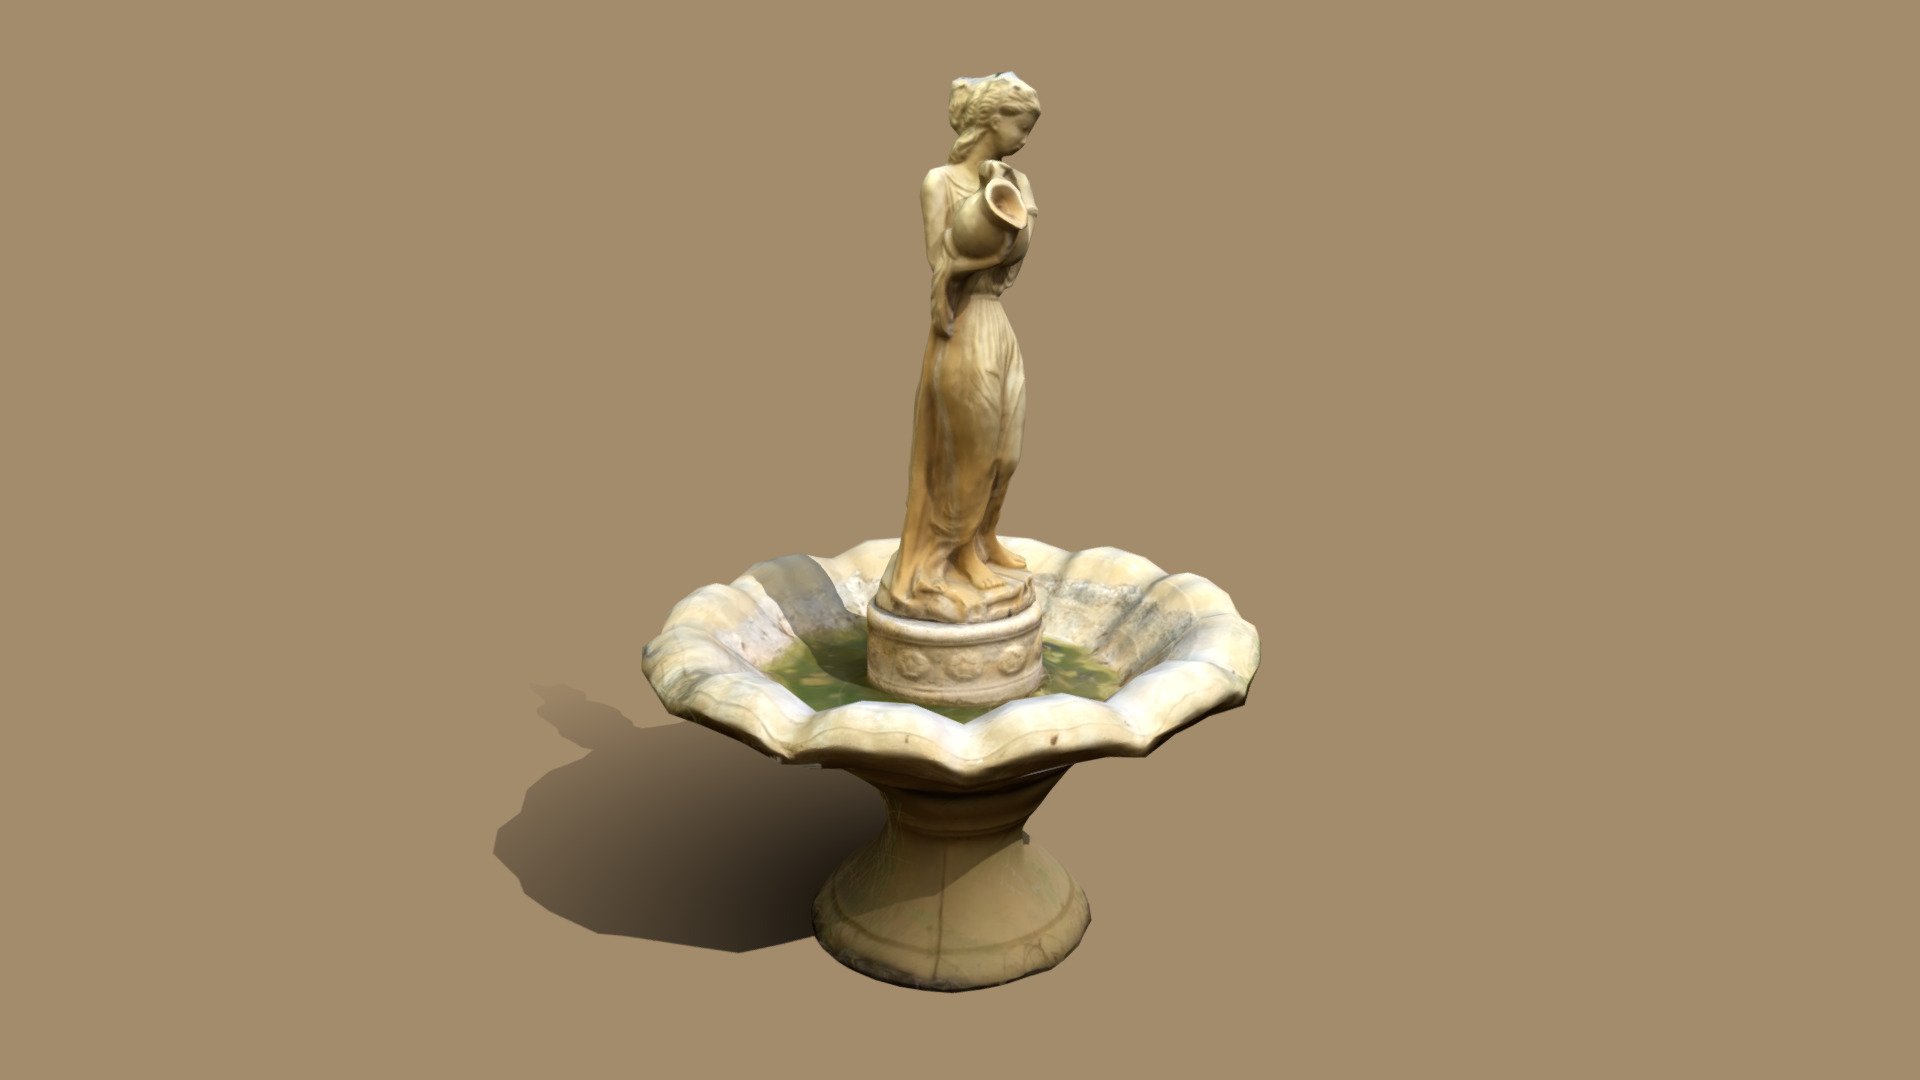 Fountain and Statue.
Captured with 123D Catch 3d model